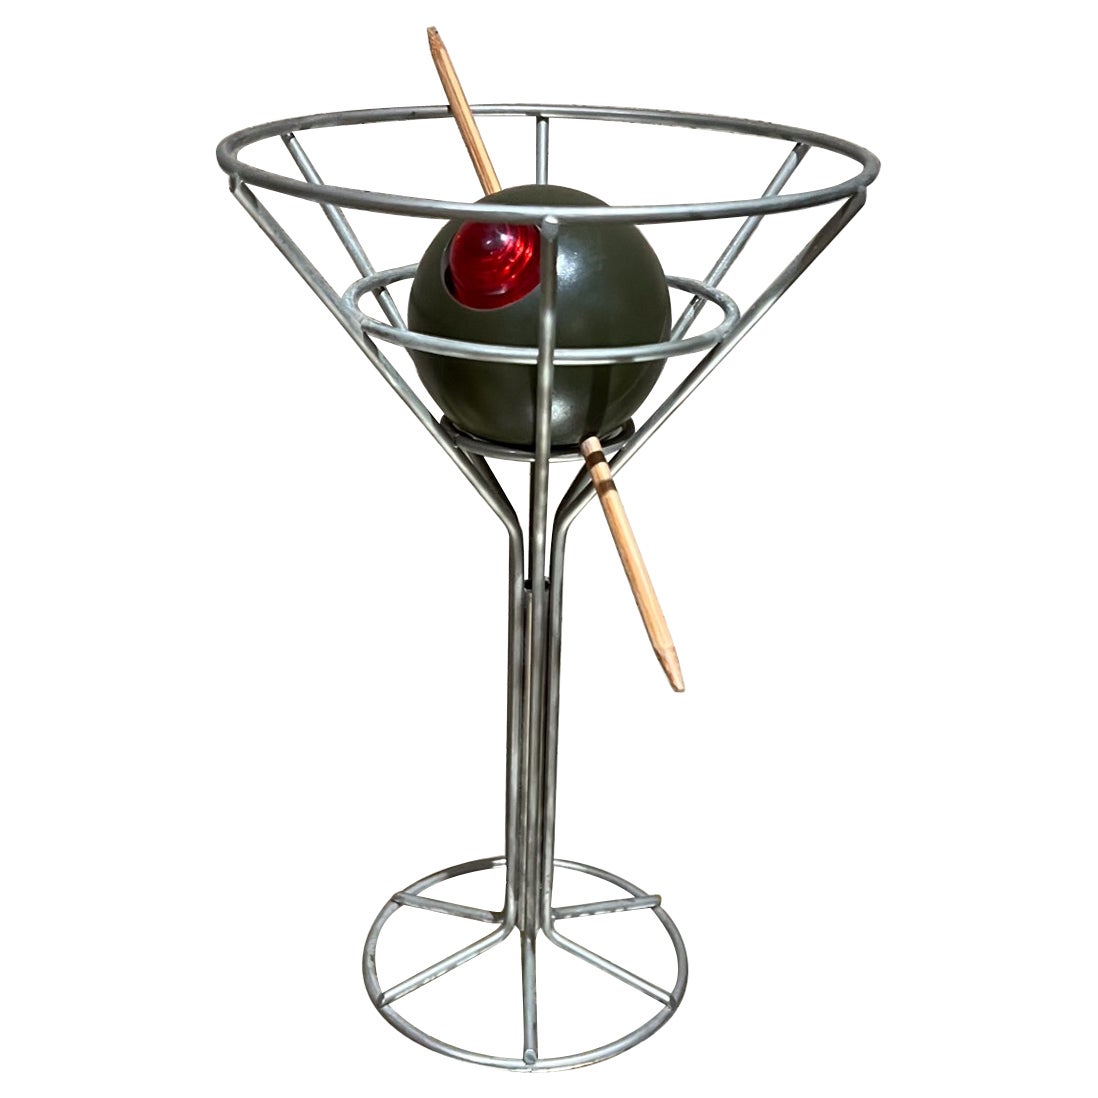 1990s Pop Art decorative vintage martini with olive bar lamp by David Krys
Postmodern Lamp is made of chrome molded plastic and has a pimento red bulb with toothpick.
9.75 h x 6.25 diameter
No cord, battery operated, new batteries included.
Switch